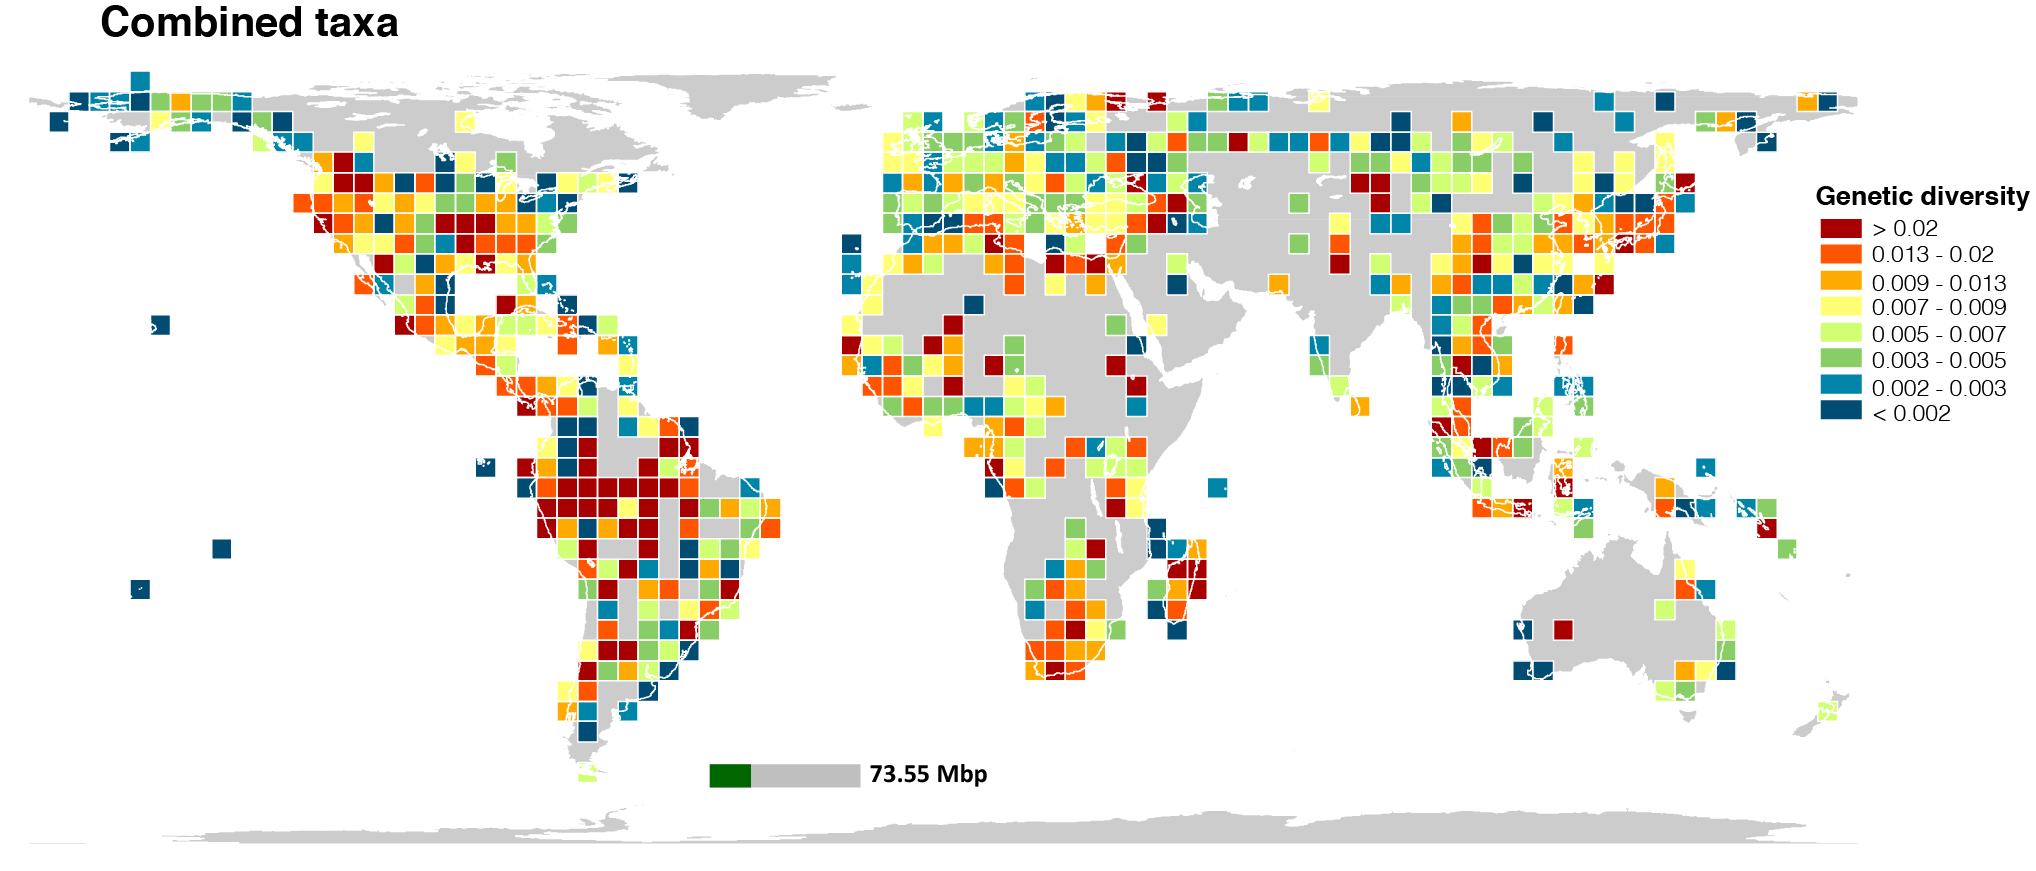 Genetic diversity Map of the world